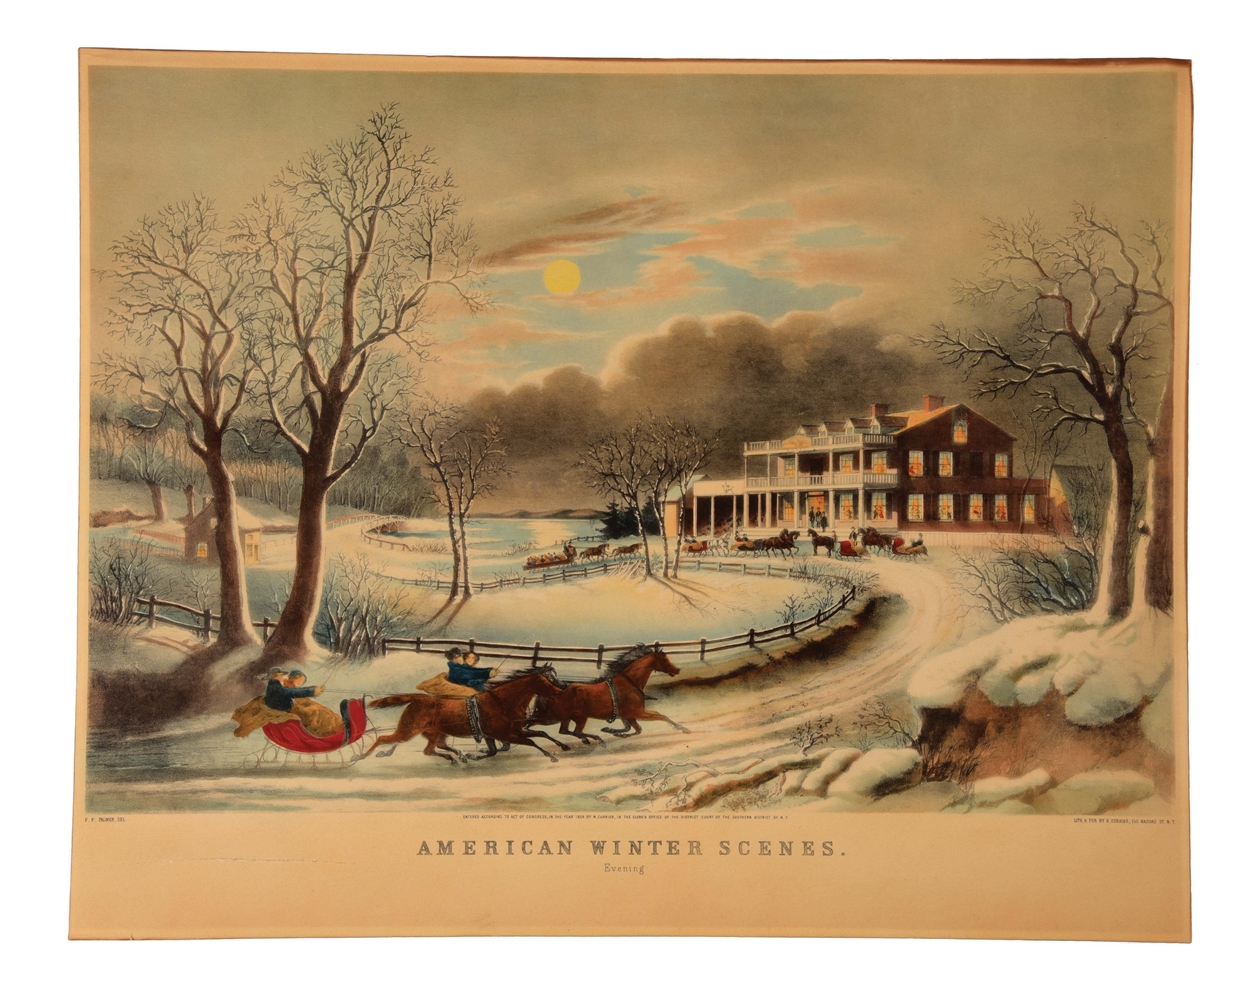 NATHANIEL CURRIER (1813 – 1888) "AMERICAN WINTER SCENES, EVENING" LITHOGRAPH LARGE FOLIO.